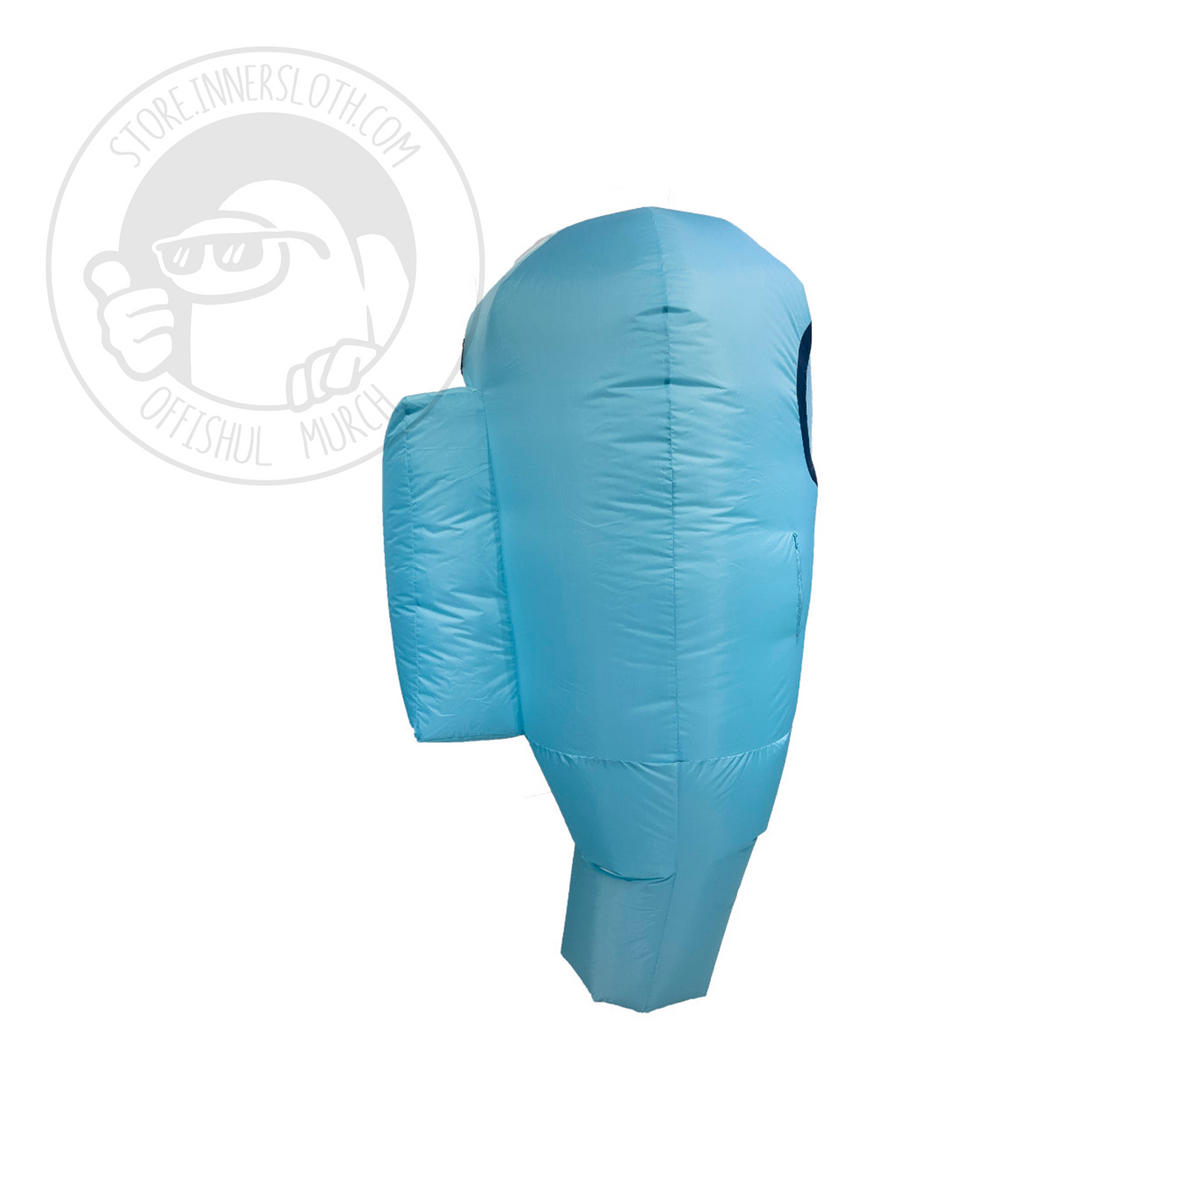 Side view of the Cyan inflatable Crewmate costume.